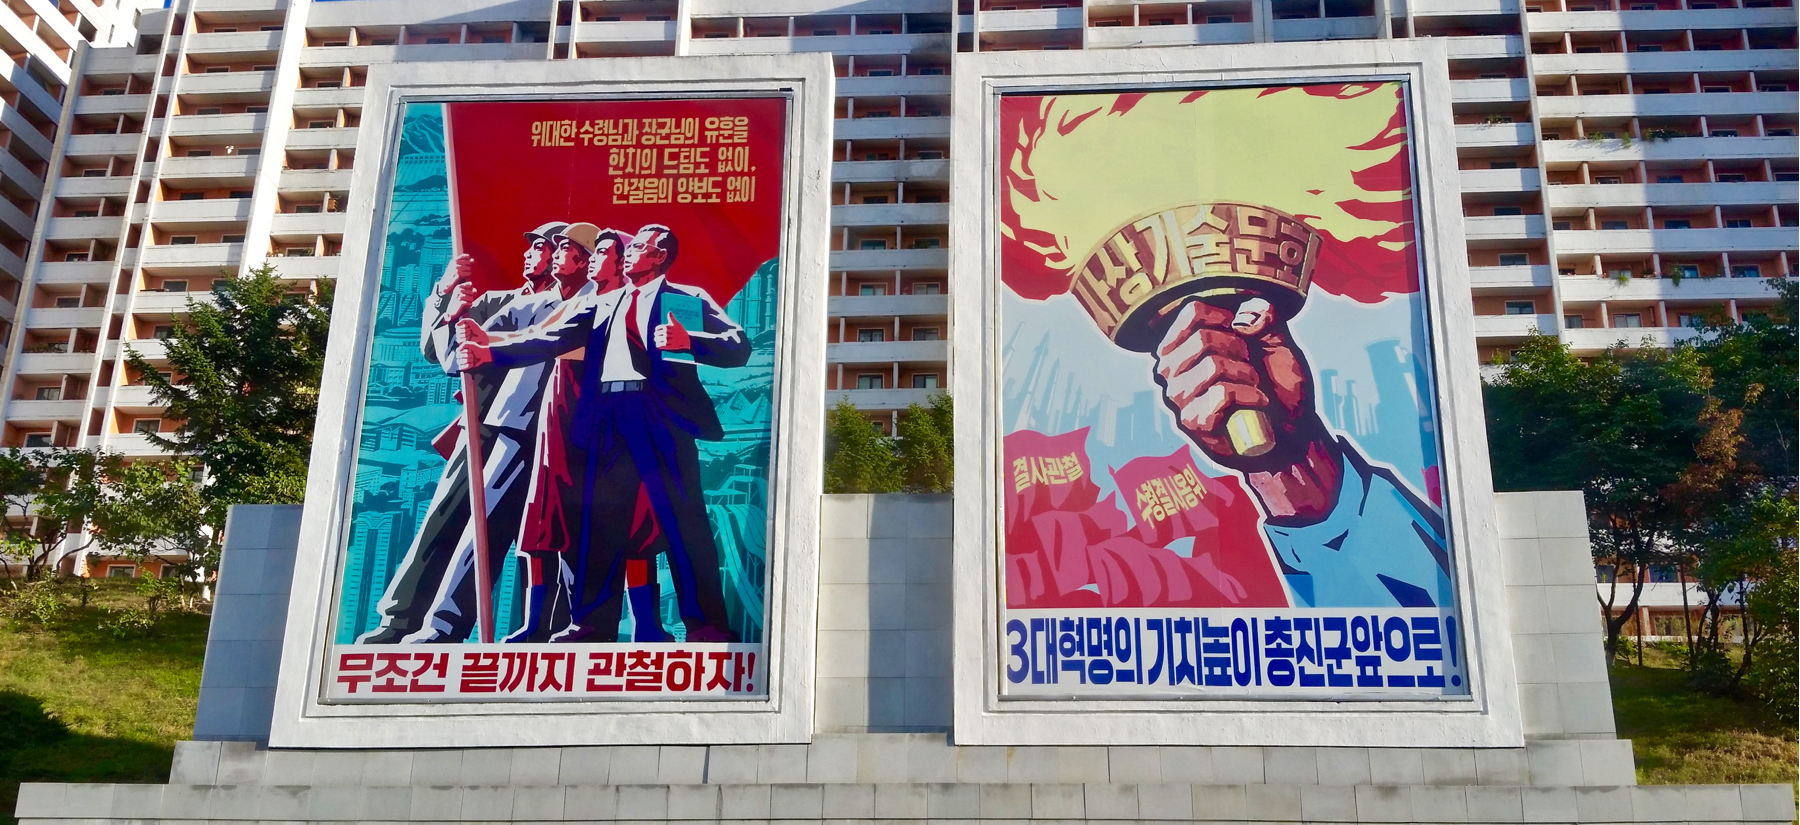 Some roadside propaganda. I tried to translate the captions of each, but it's pretty hard: On the left, 'Succeed unconditionally until the end.' and on the right 'Advance the banner of the three revolutions'?